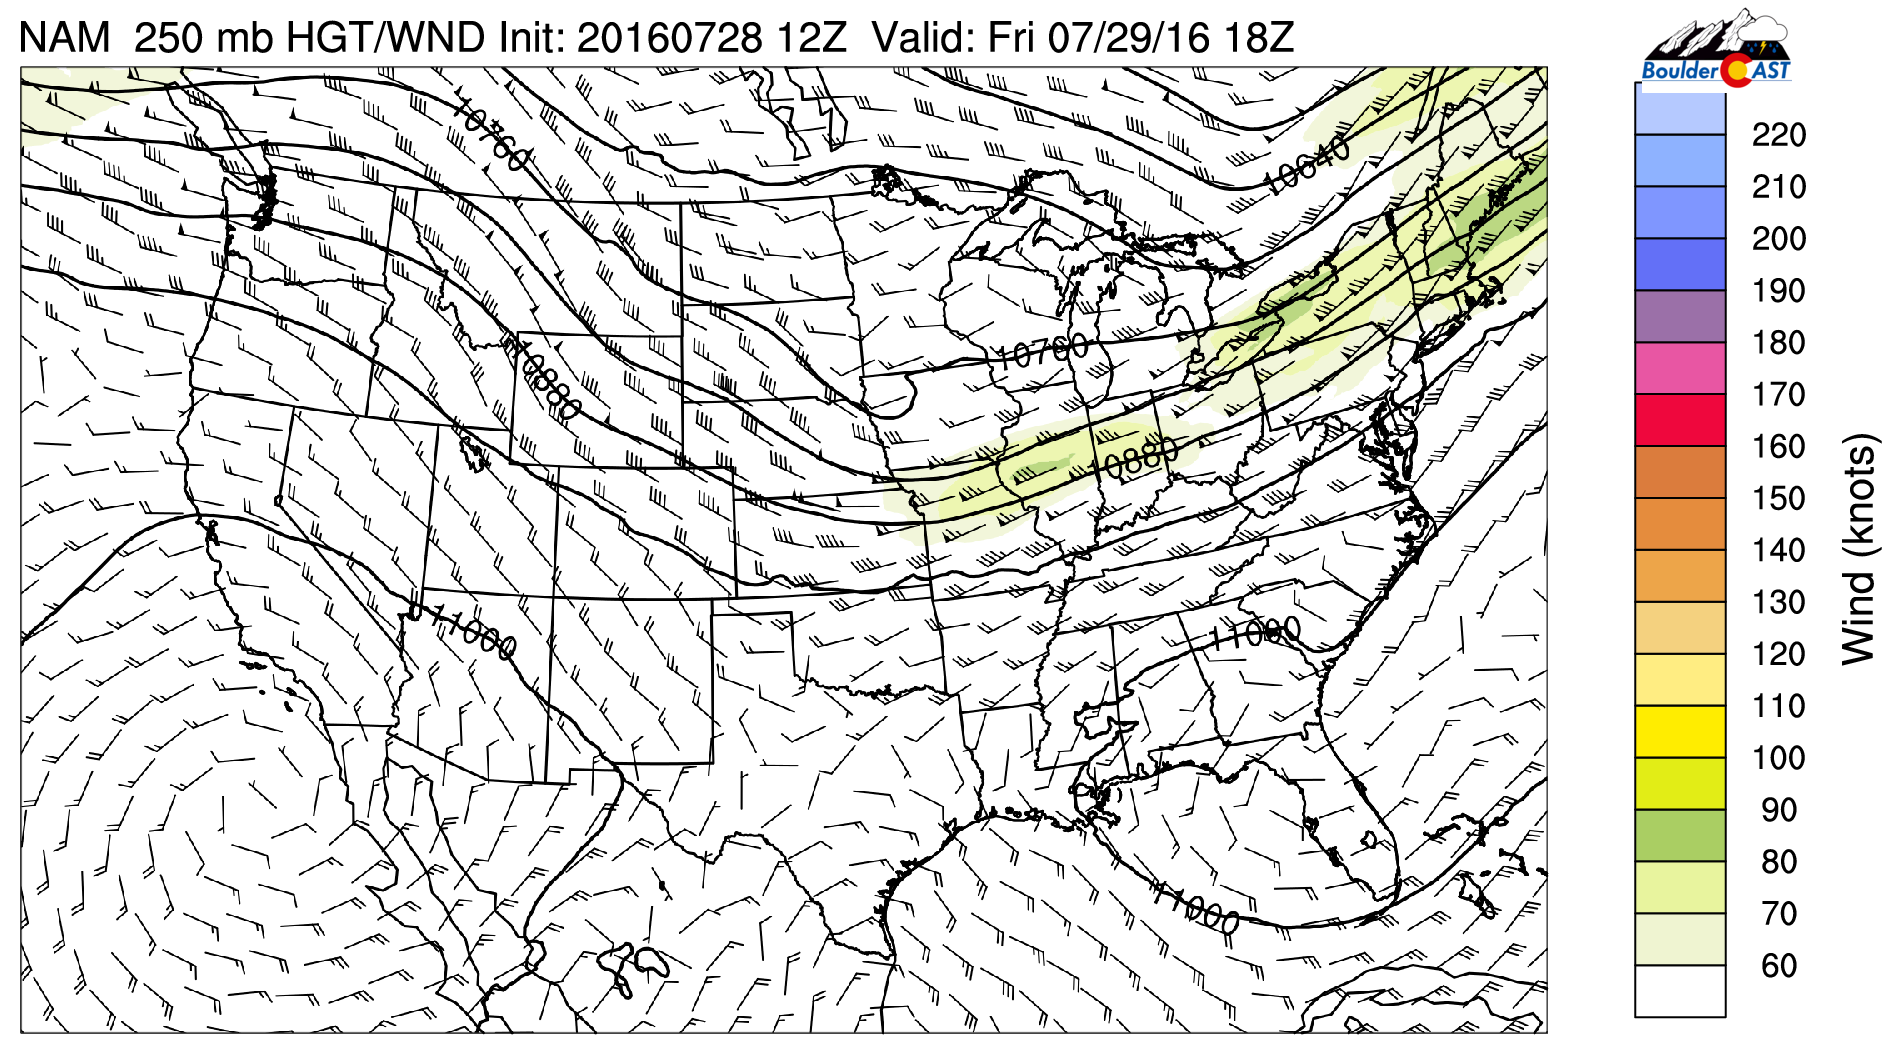 NAM 250 mb heights and winds for this afternoon